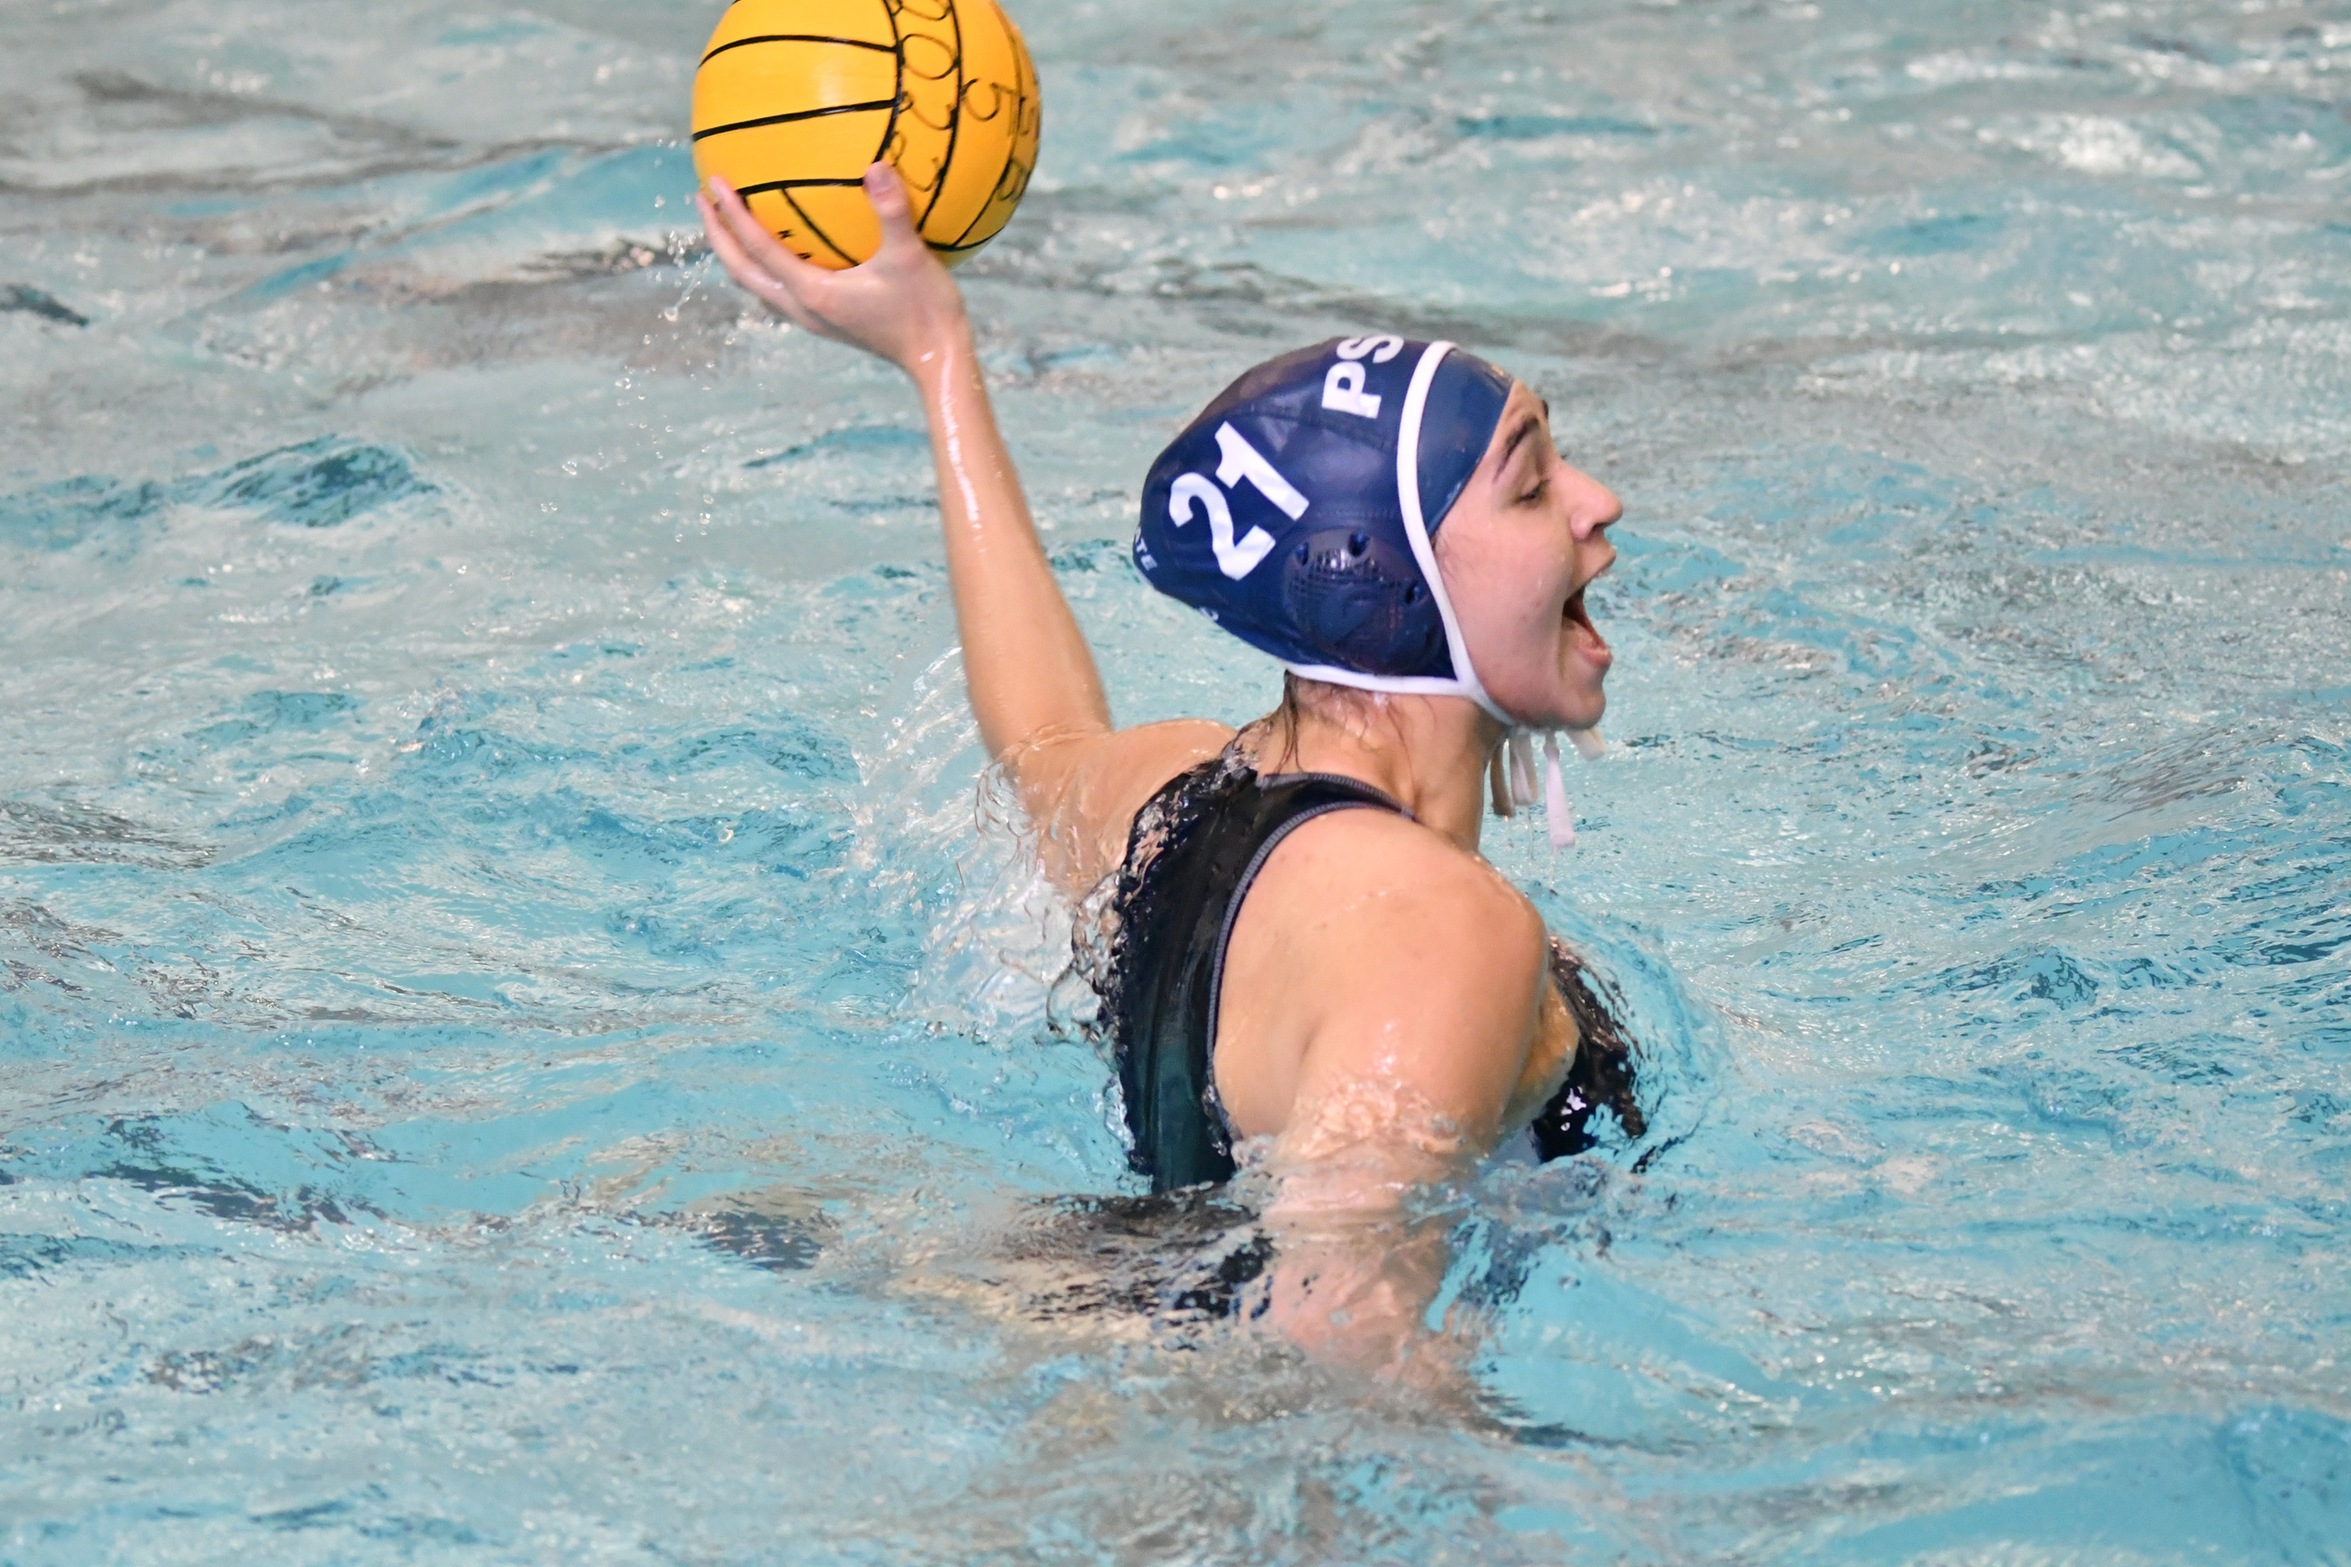 Behrend Falls to Carthage on Final Day of CWPA Championship